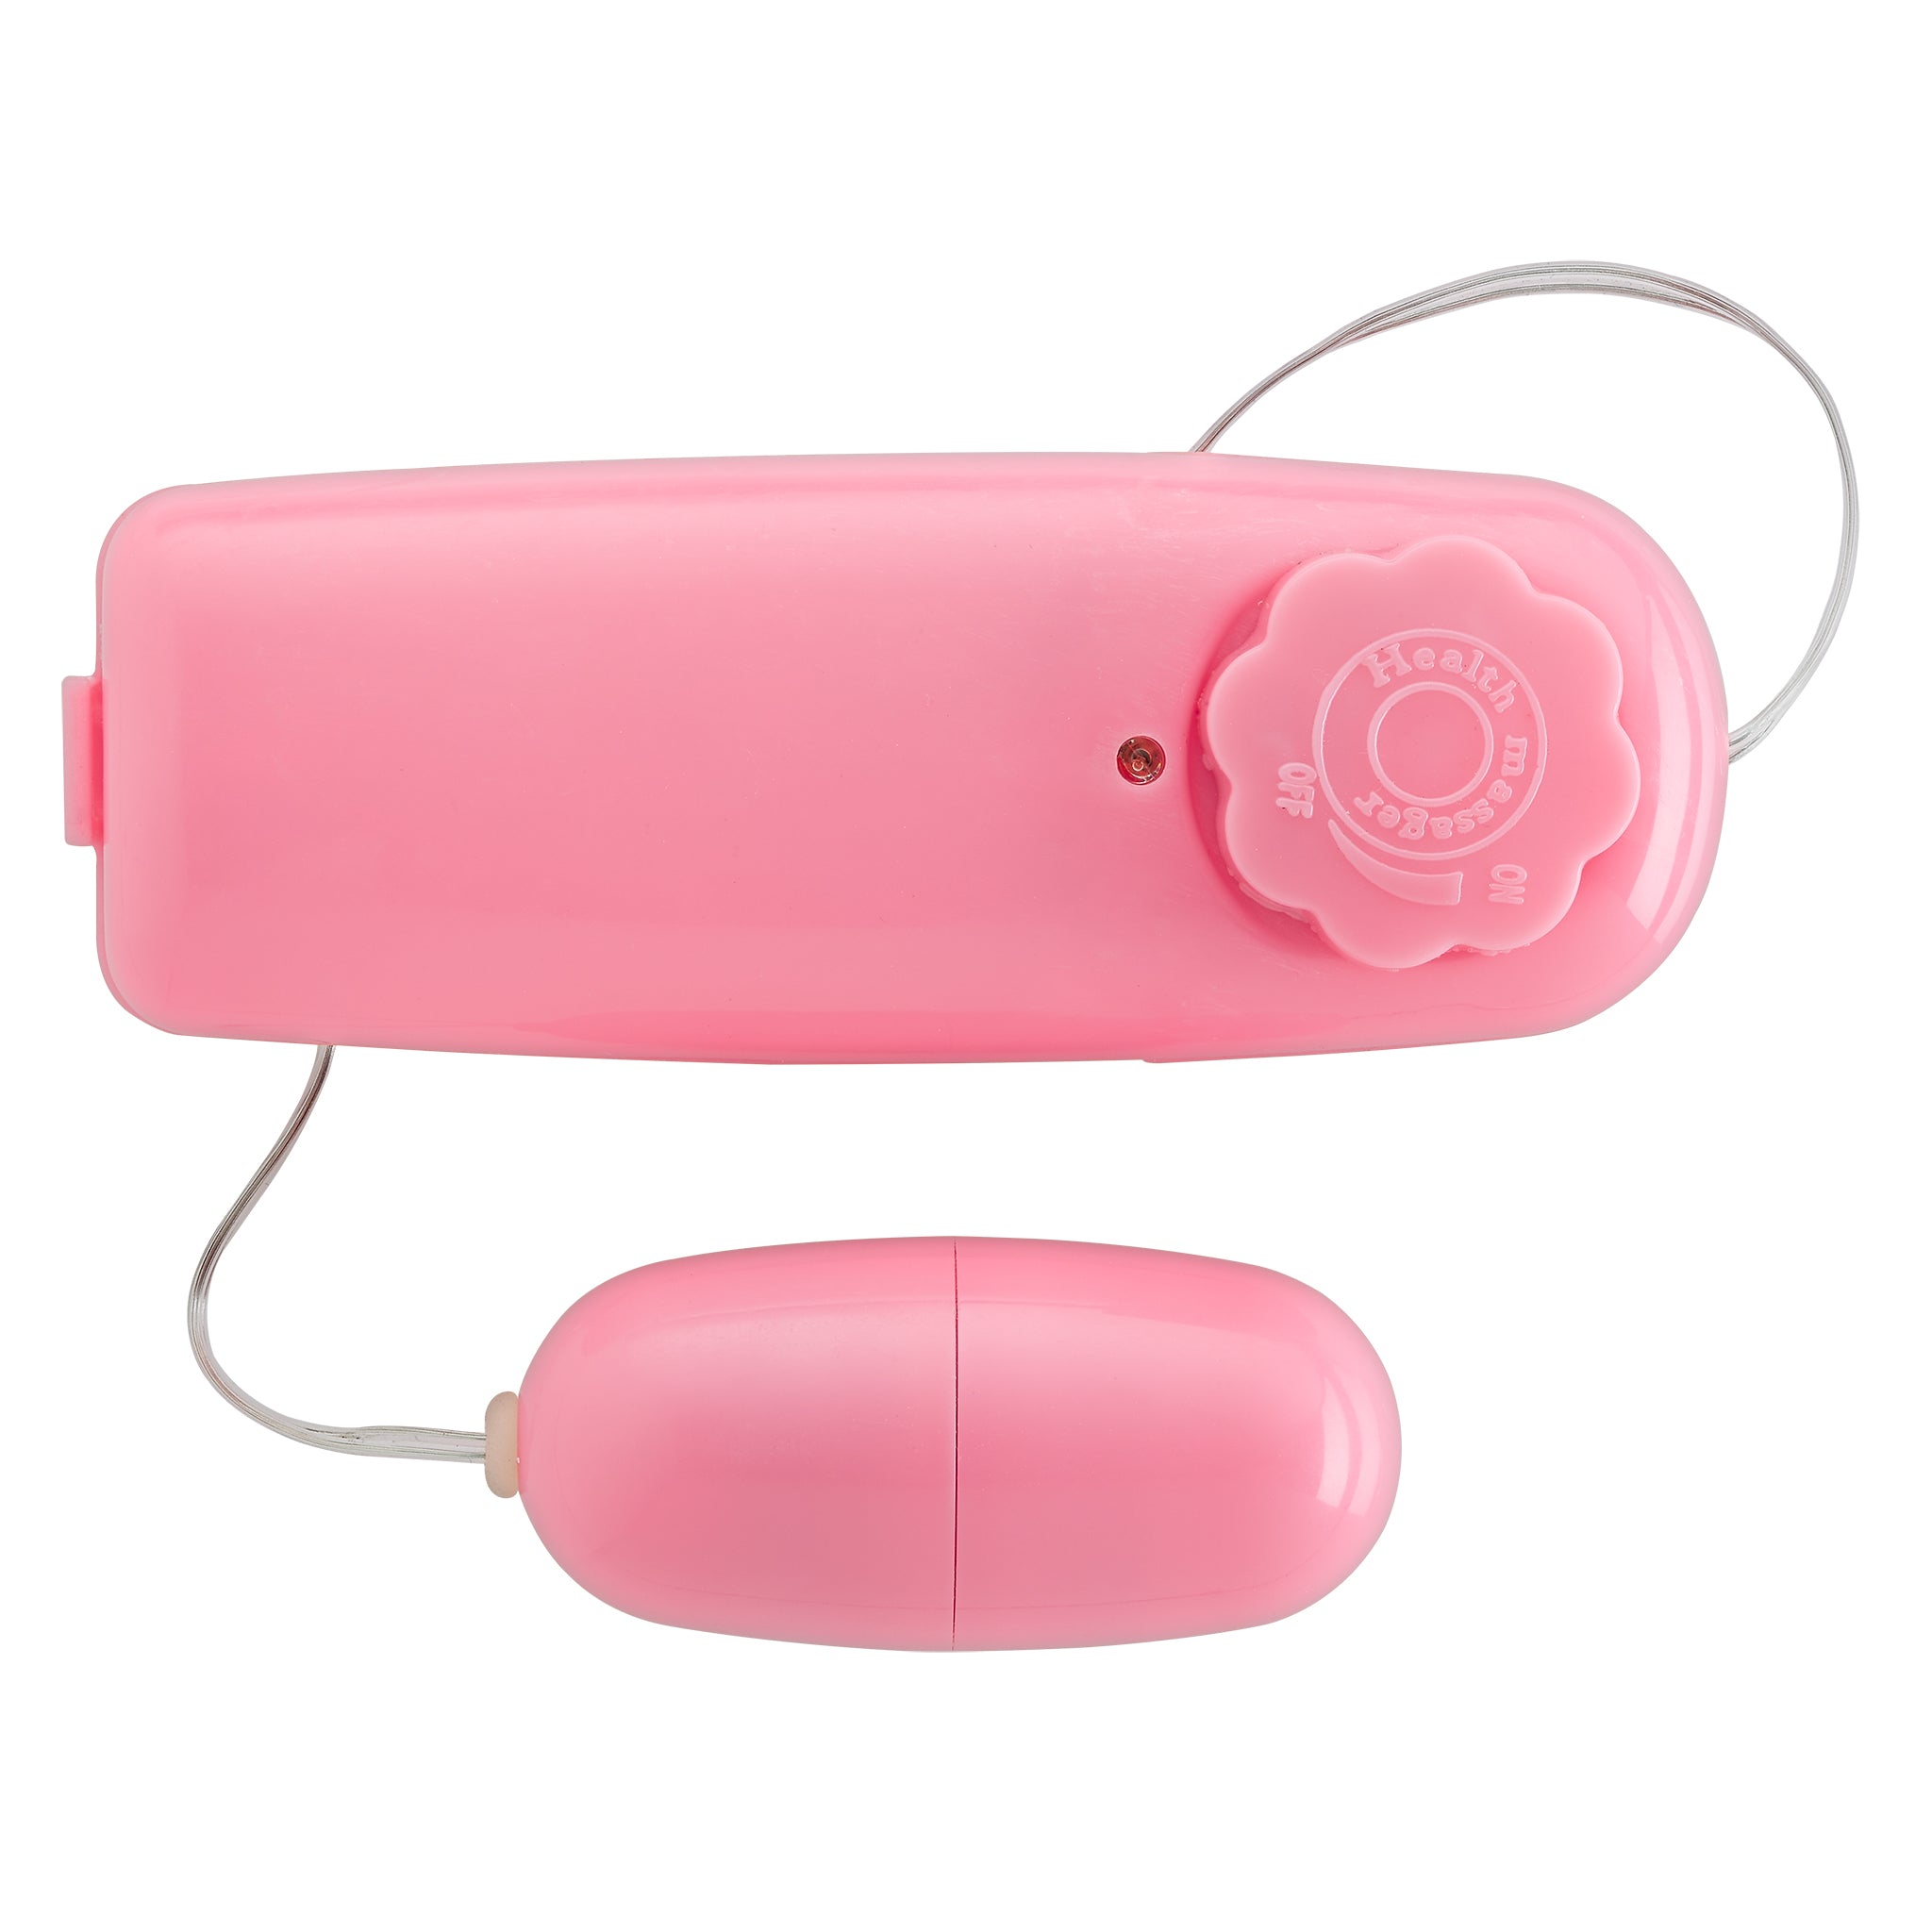 Sensual Delight in Cloud 9 Vibrating Bullet with remote